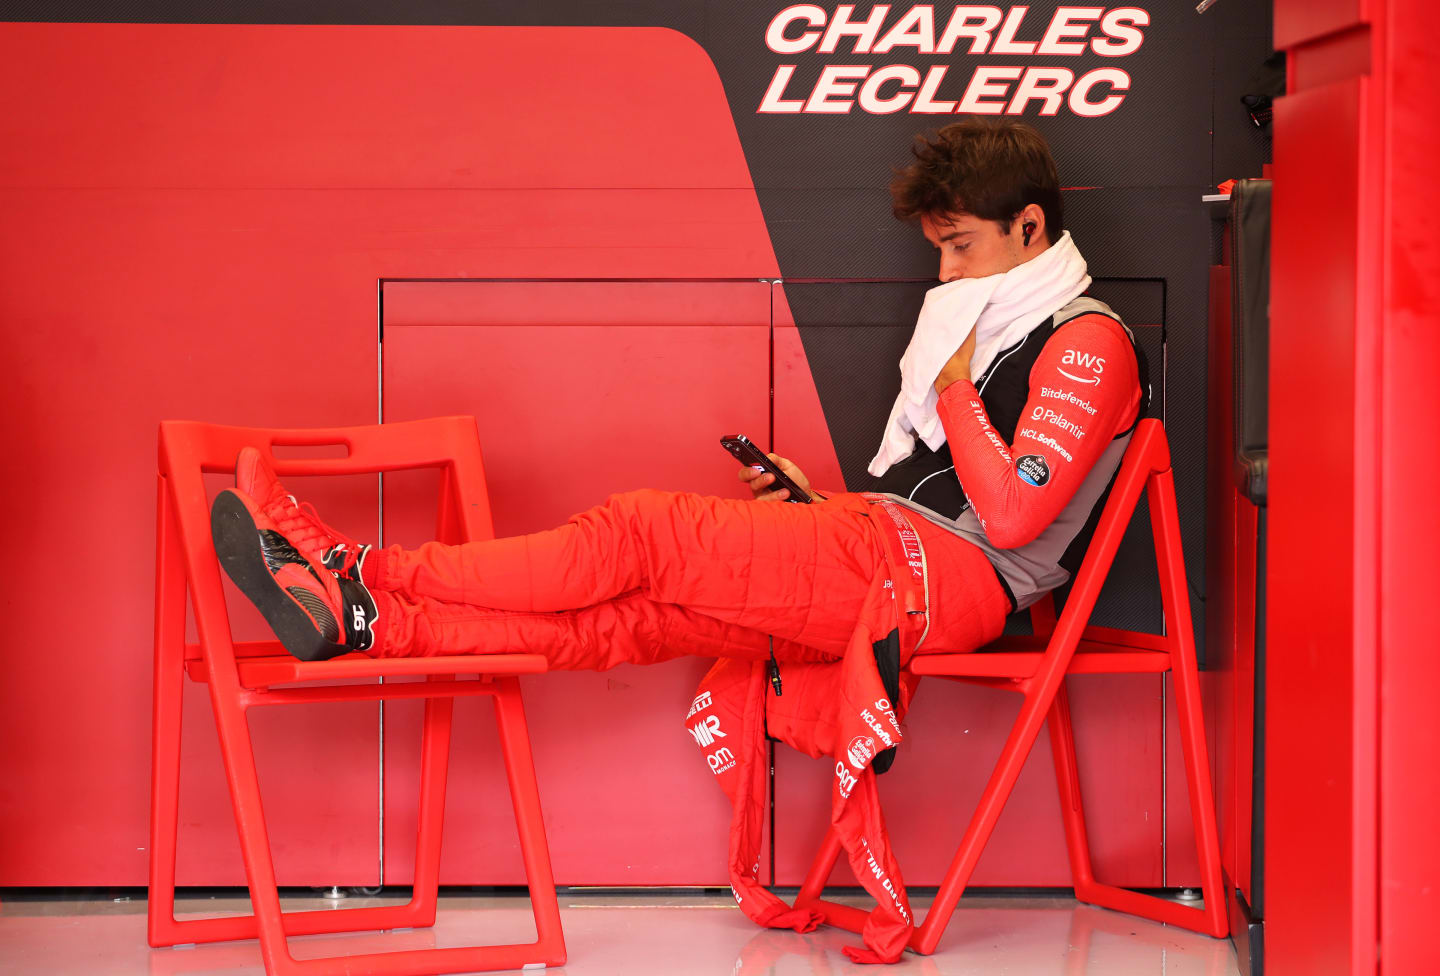 ZANDVOORT, NETHERLANDS - AUGUST 27: Charles Leclerc of Monaco and Ferrari prepares to drive in the garage prior to the F1 Grand Prix of The Netherlands at Circuit Zandvoort on August 27, 2023 in Zandvoort, Netherlands. (Photo by Peter Fox/Getty Images)